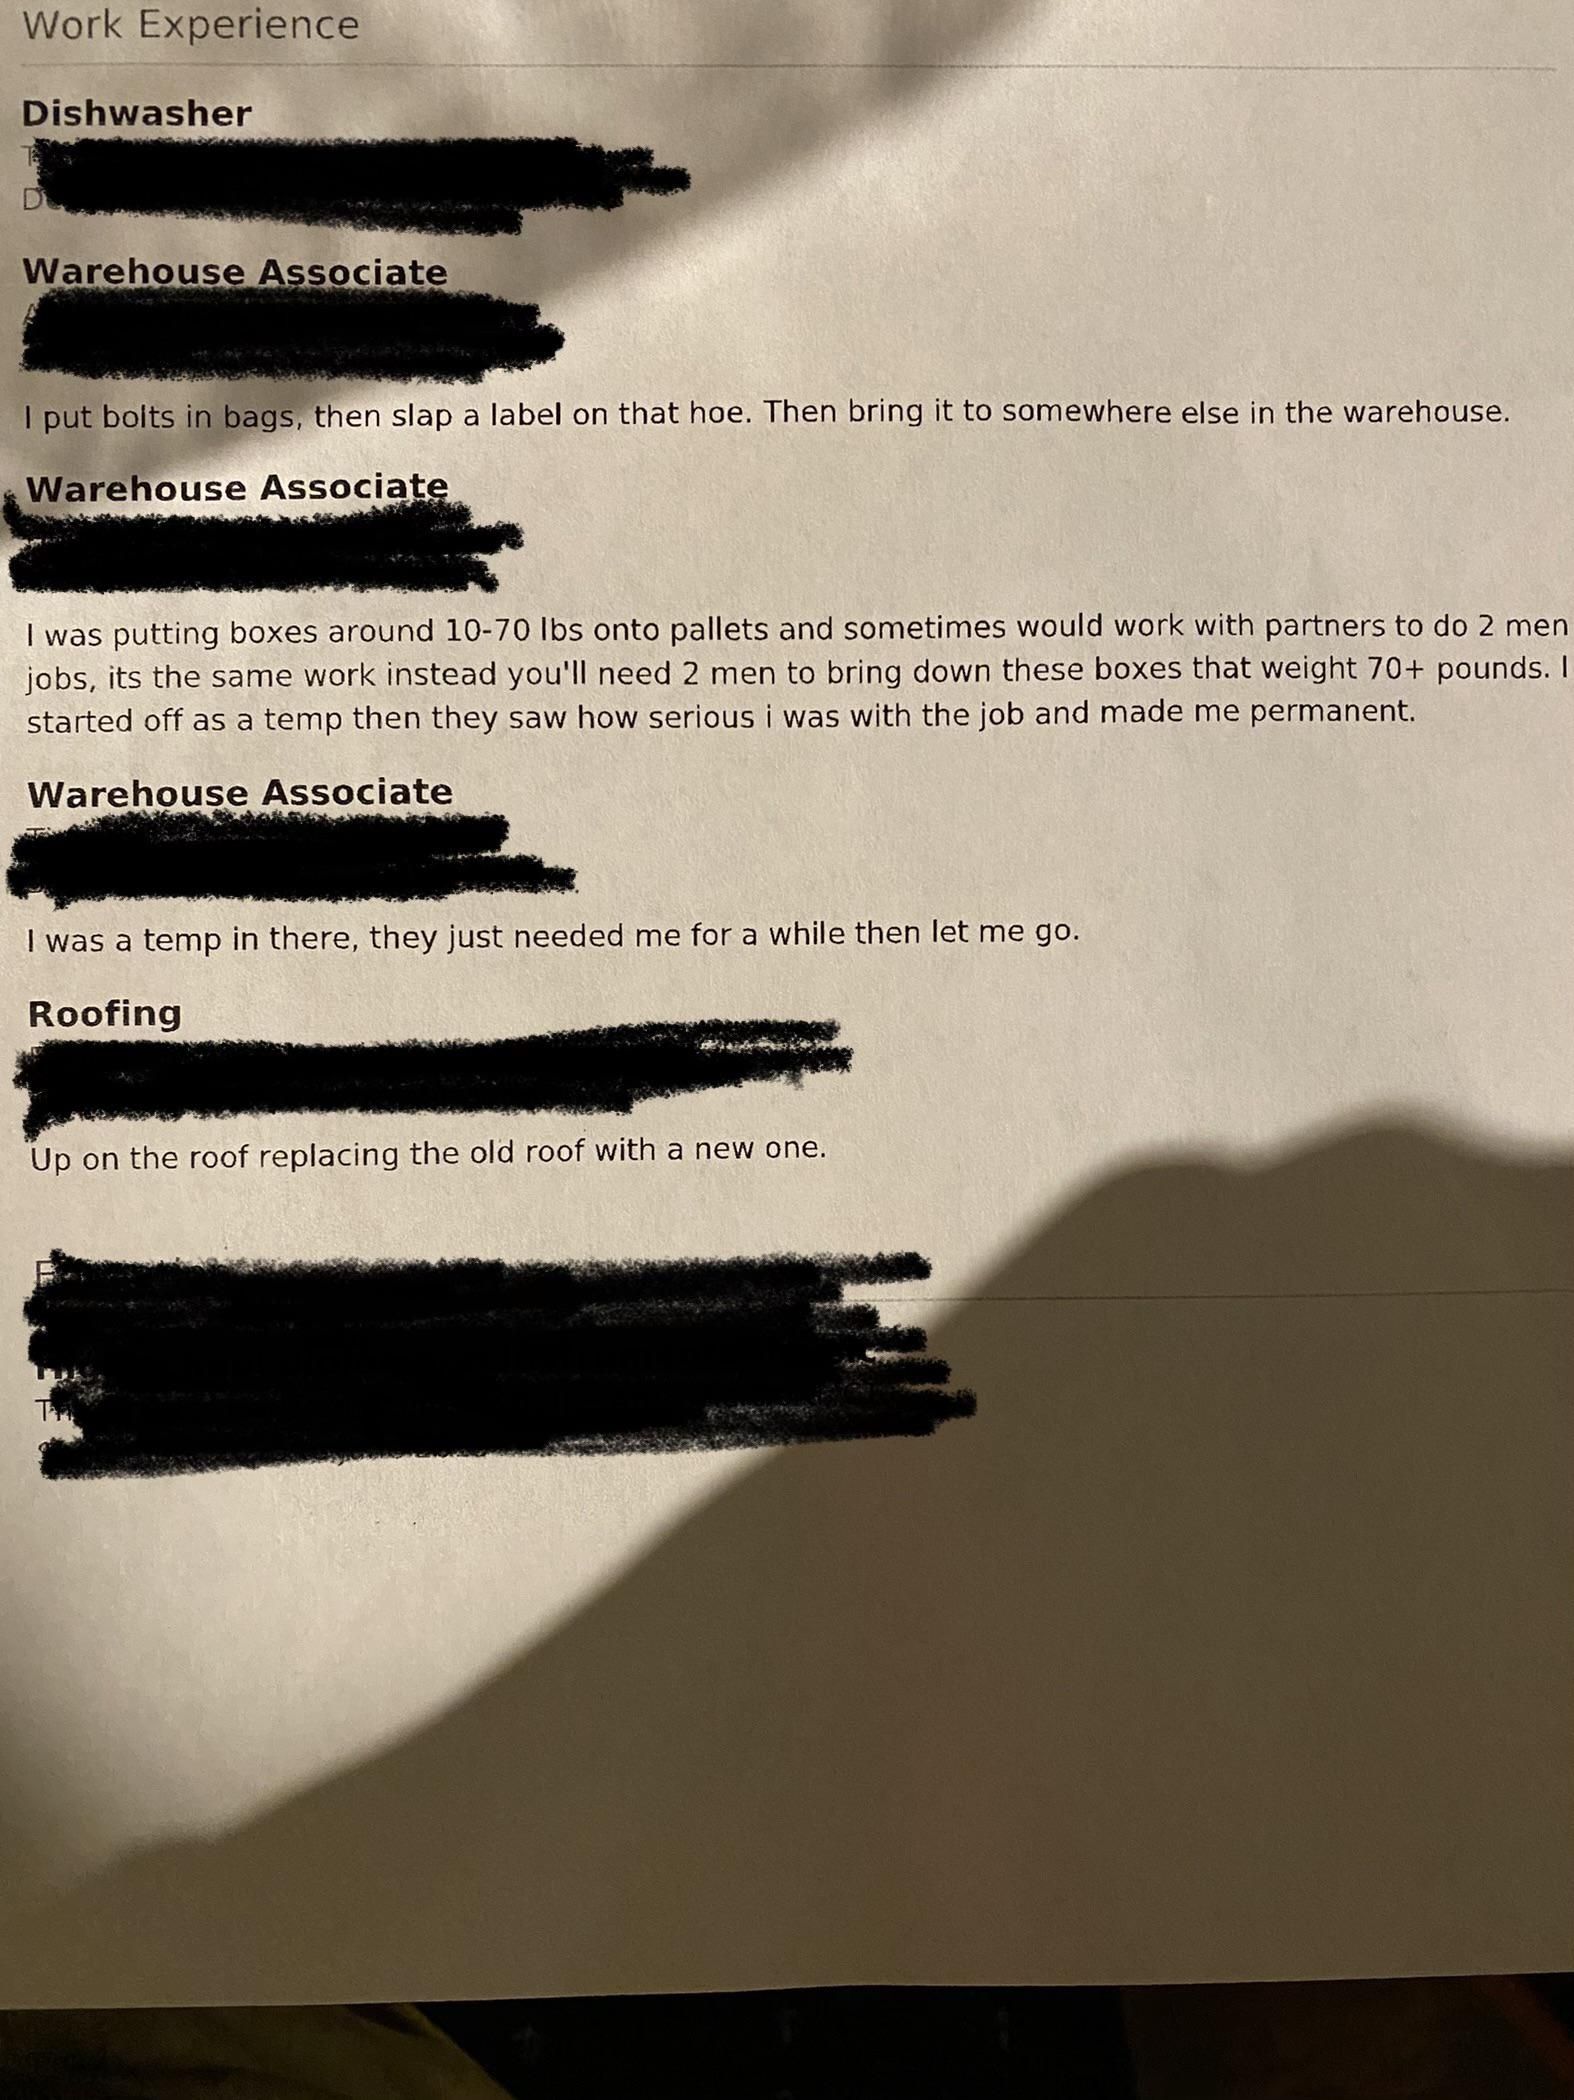 Wife’s employer received this resume for a position. He got an interview because the manager couldn’t stop laughing